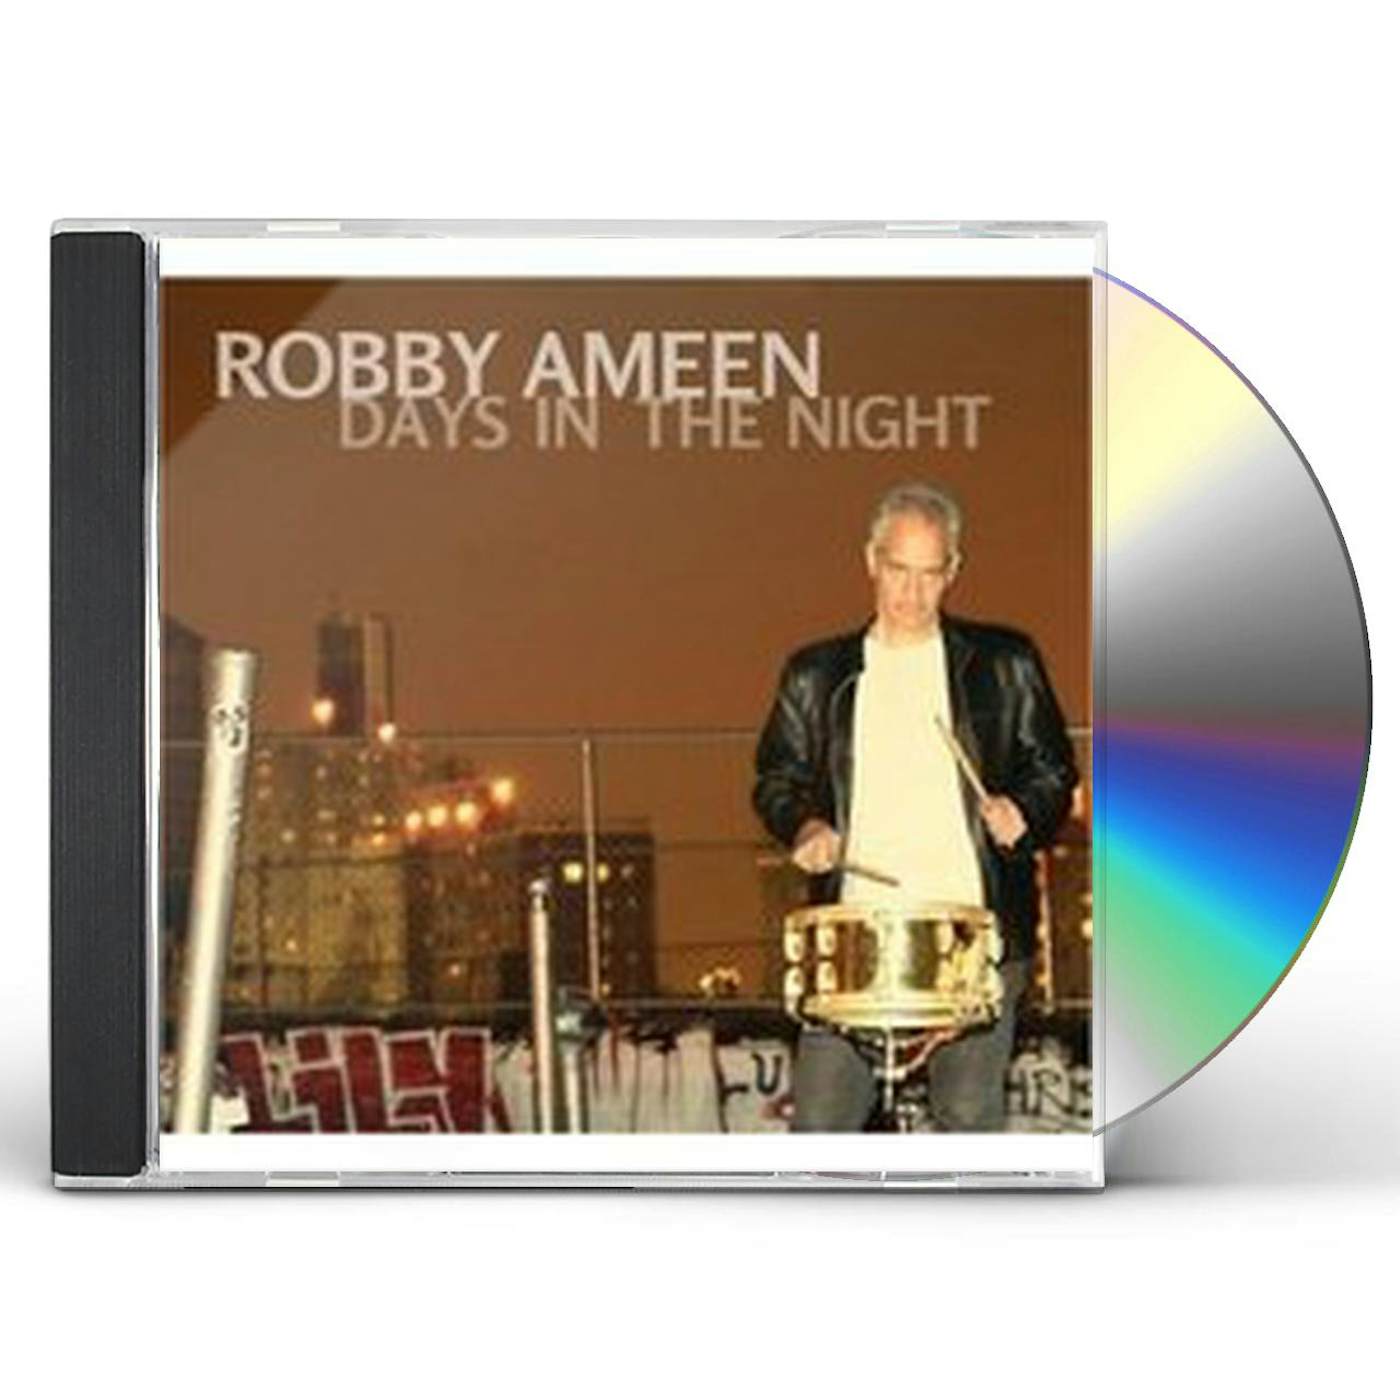 Robby Ameen DAYS IN THE NIGHT CD